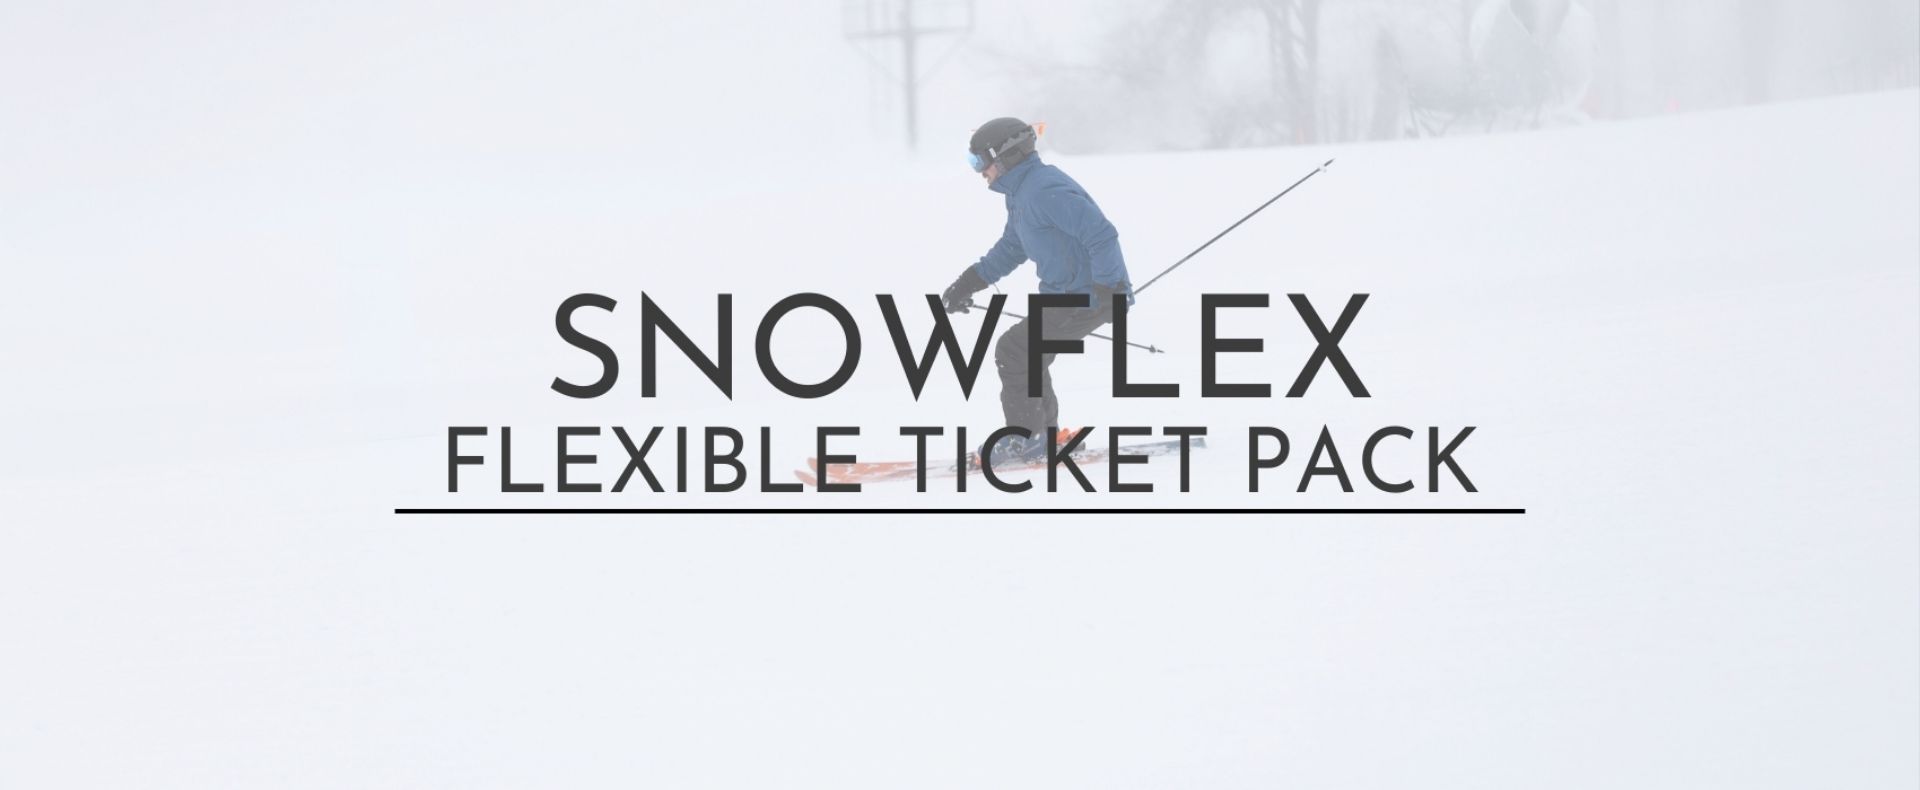 SnowFlex Ticket Pack at The Highlands